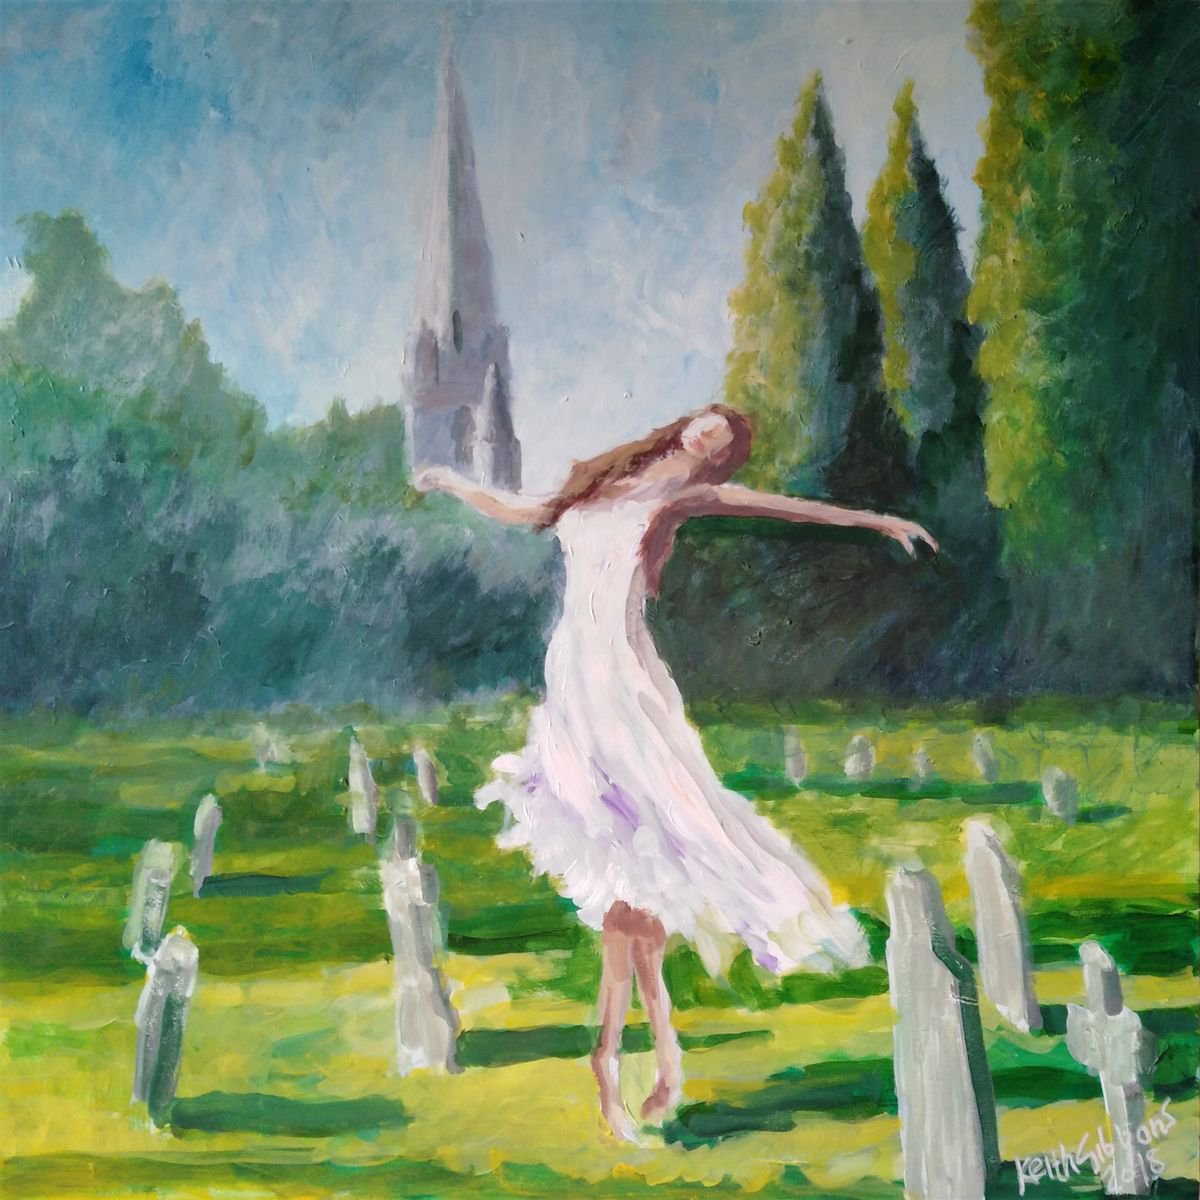 Cemetery Dance by keith gibbons